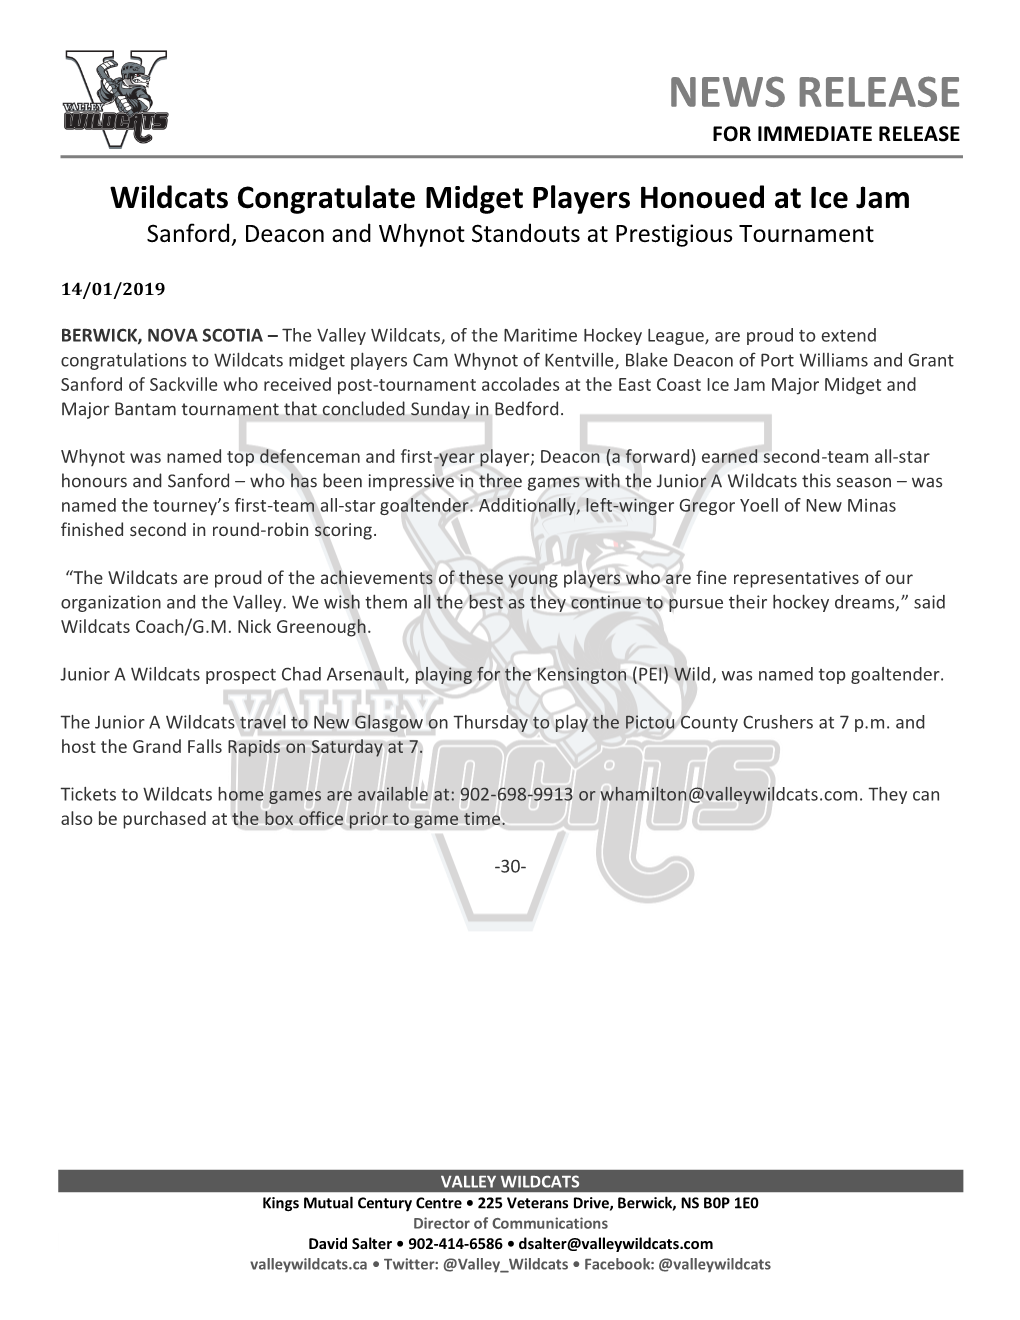 Wildcats Congratulate Midget Players Honoued at Ice Jam Sanford, Deacon and Whynot Standouts at Prestigious Tournament